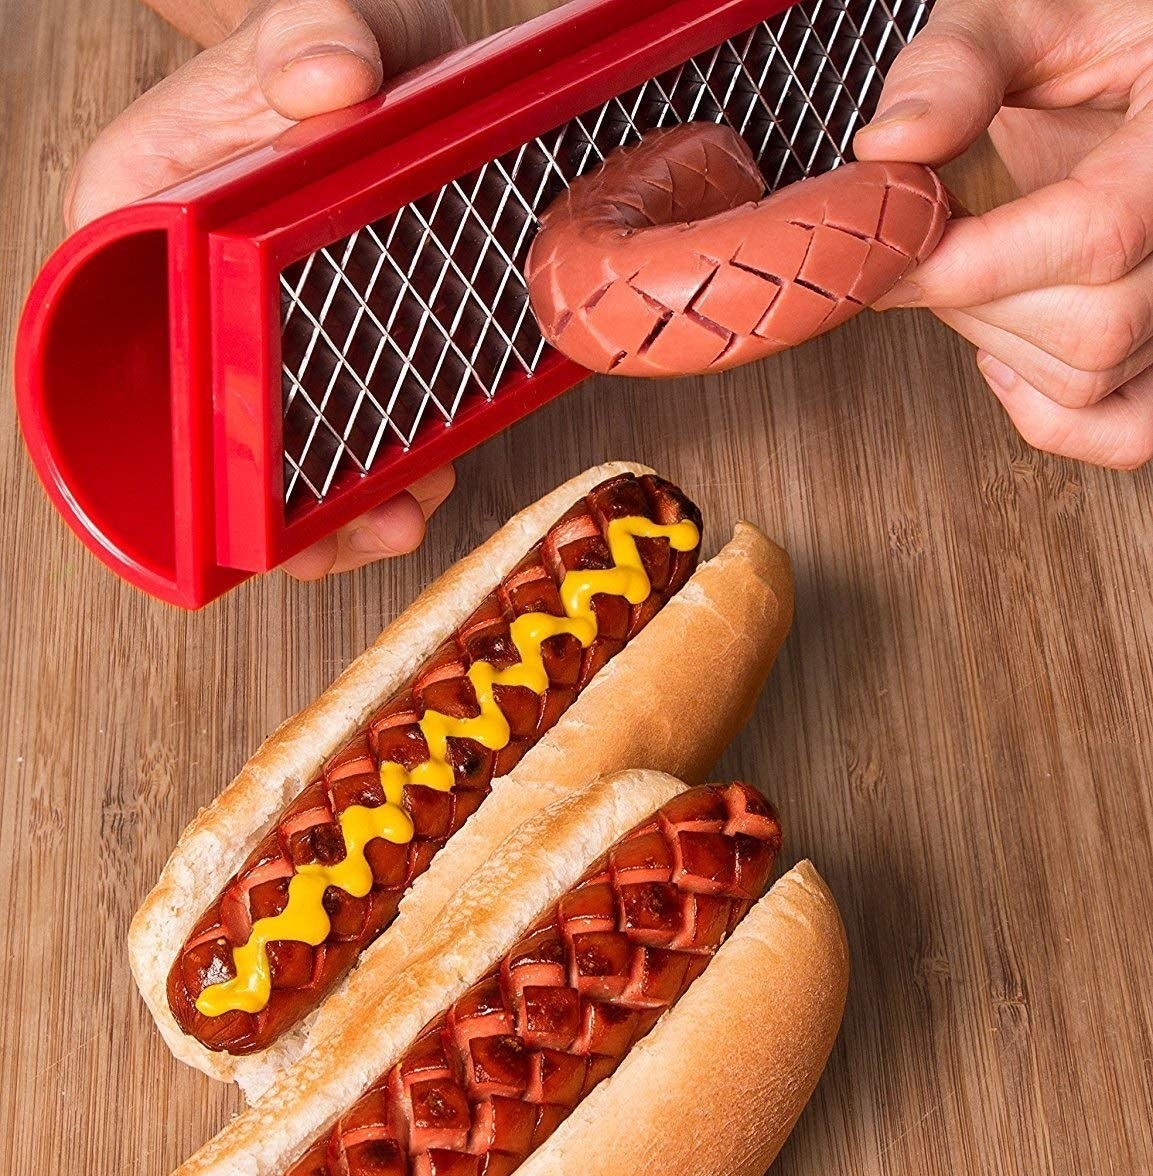 A person using the slicer on a hot dog